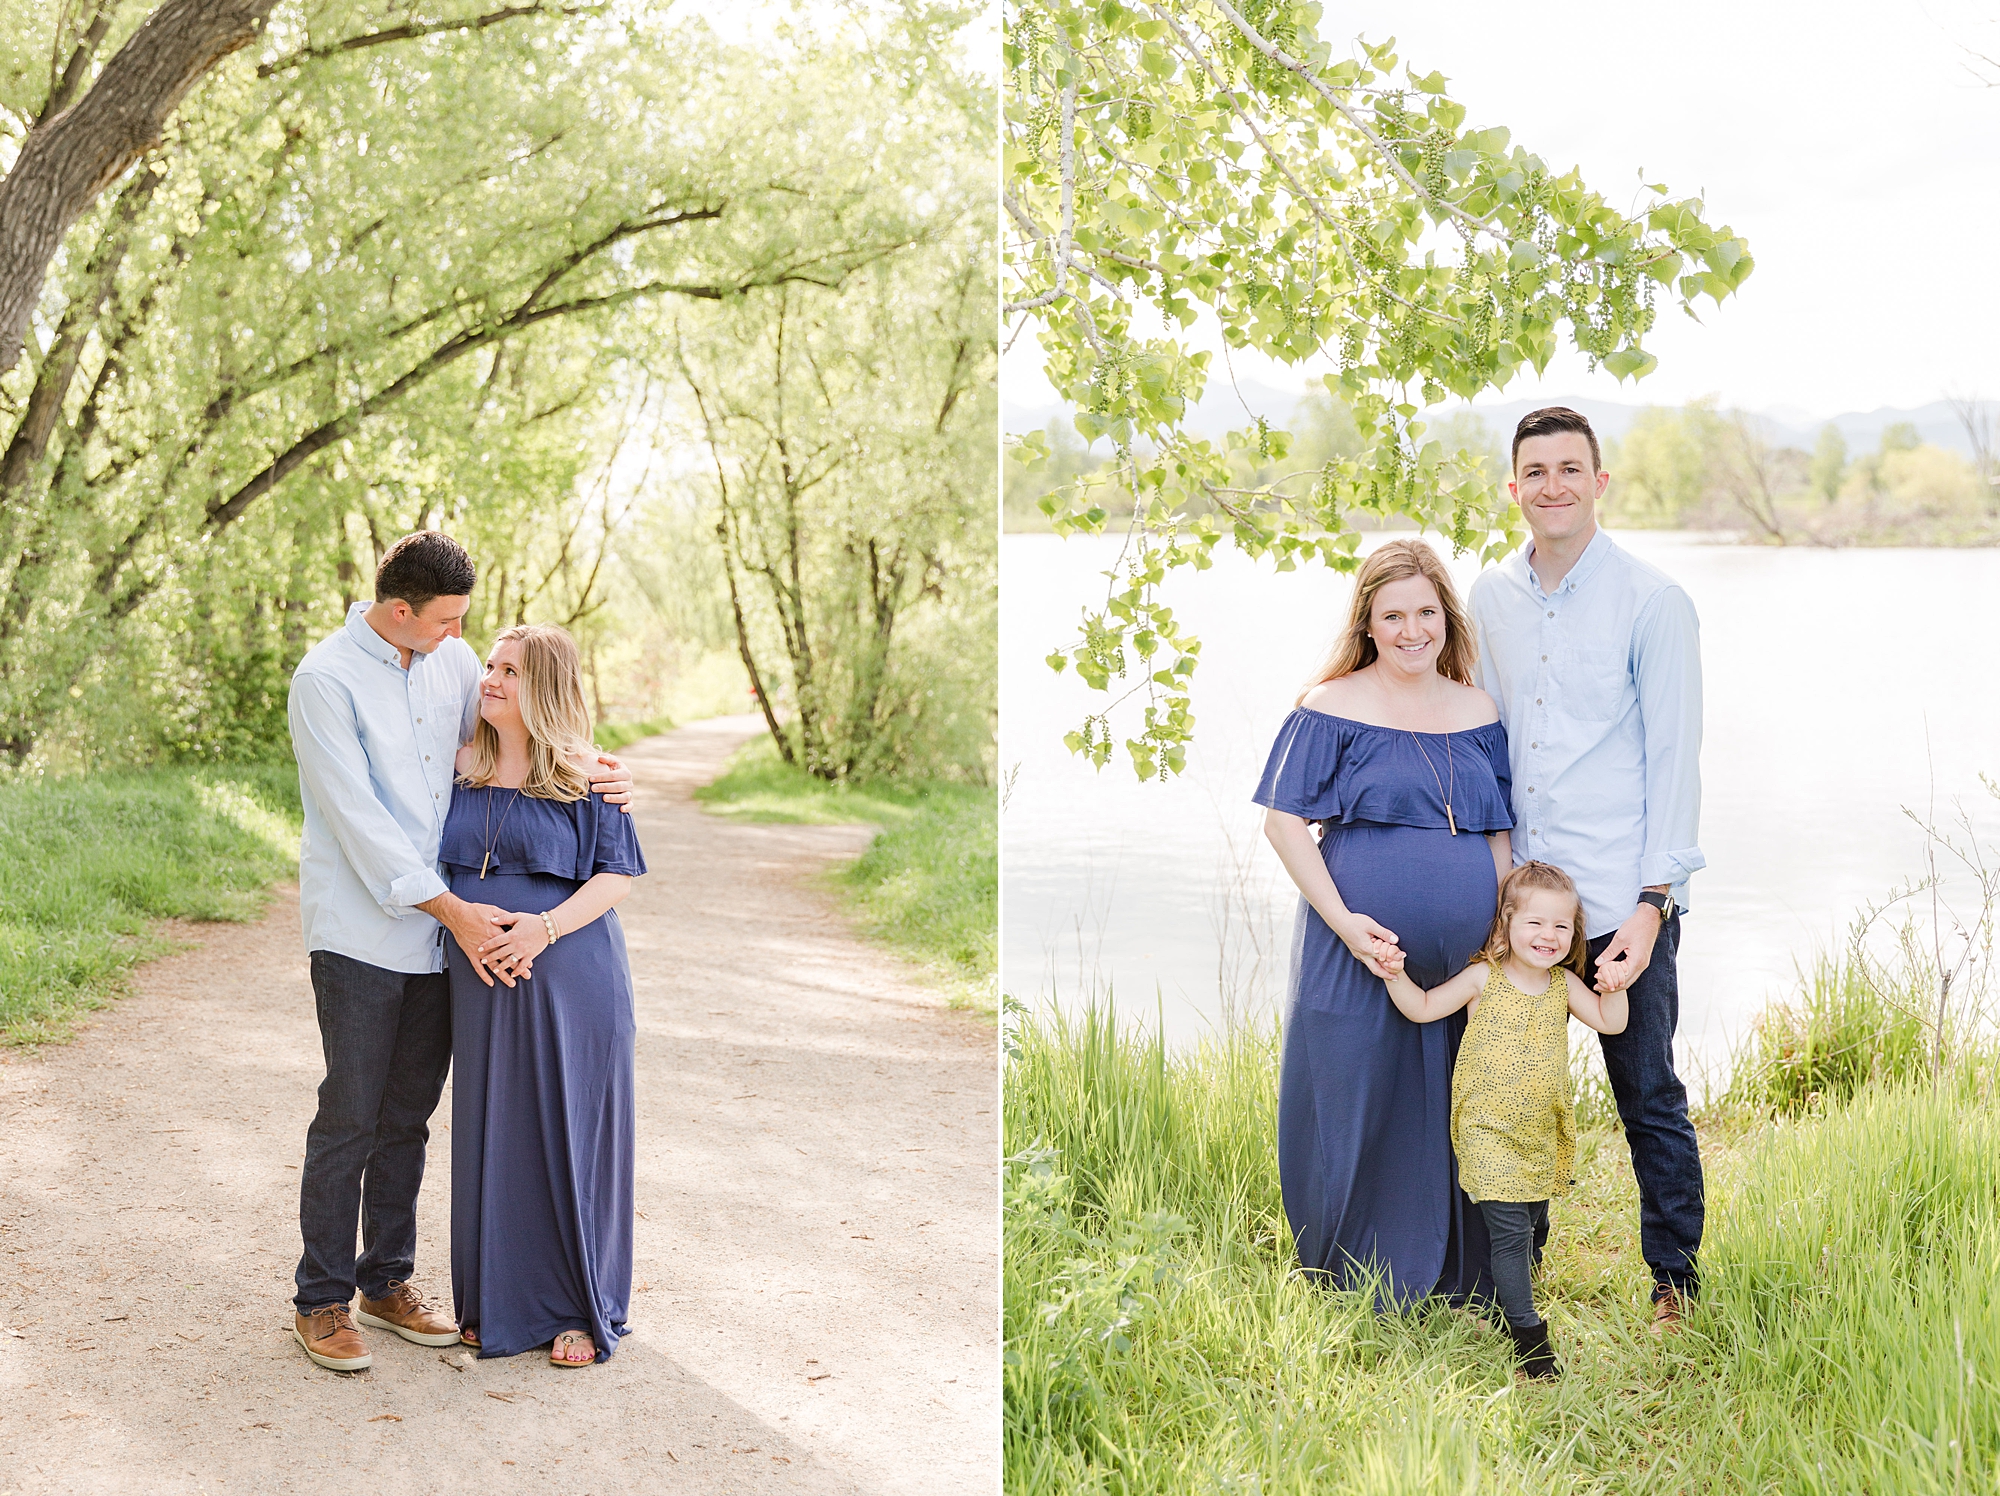 Northern Colorado Top 10 Locations for Family Photo Sessions: Golden Ponds